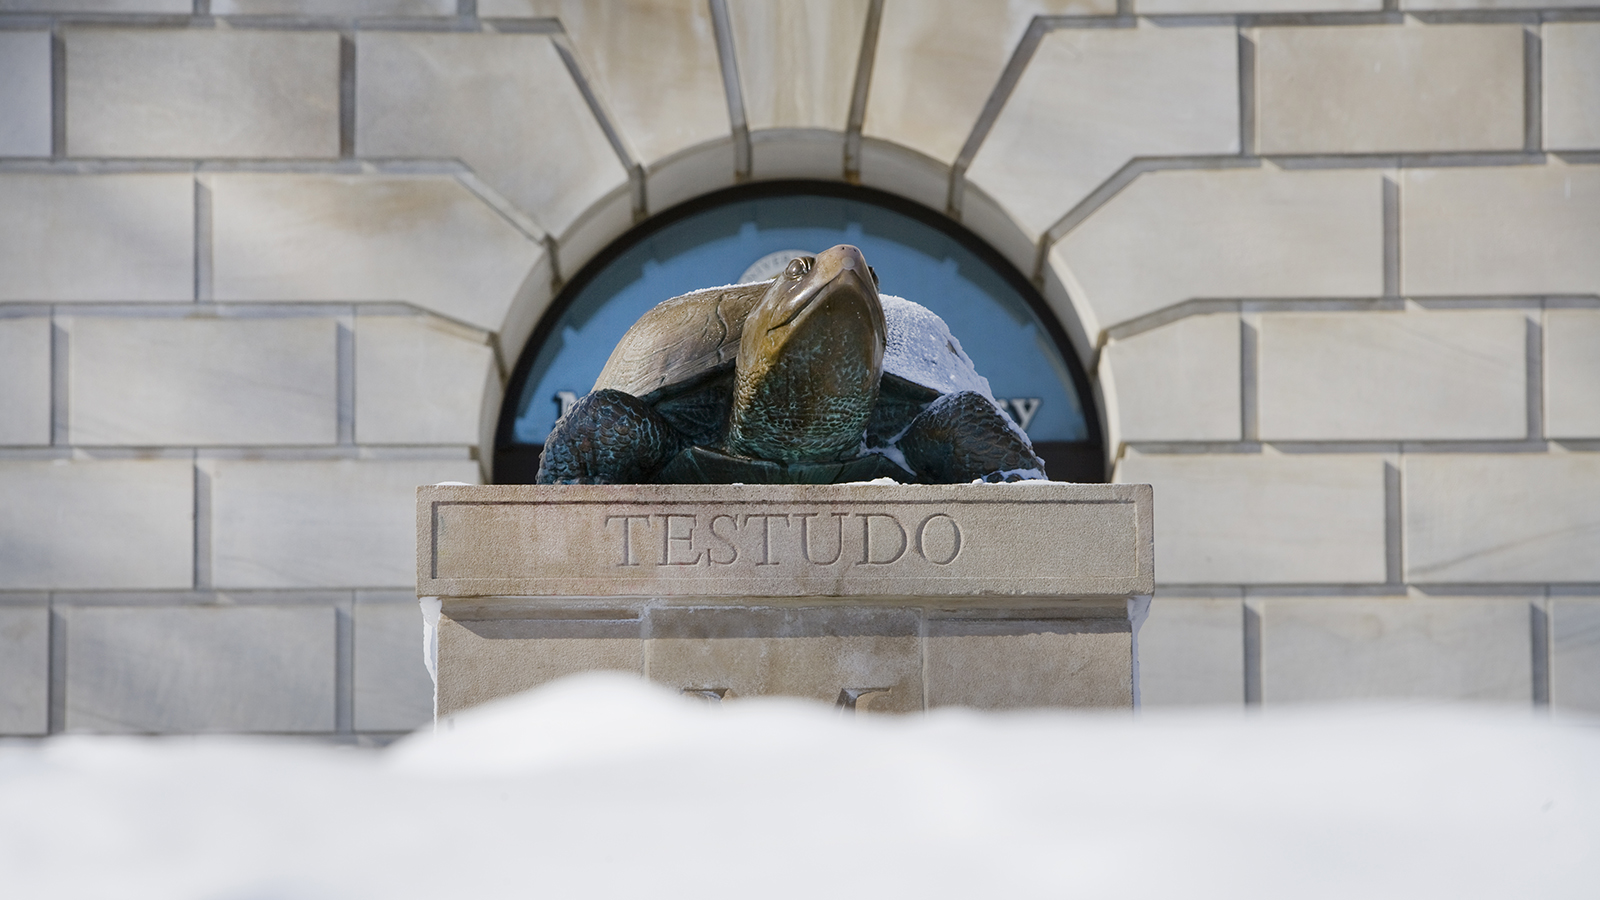  Testudo with snow in winter.